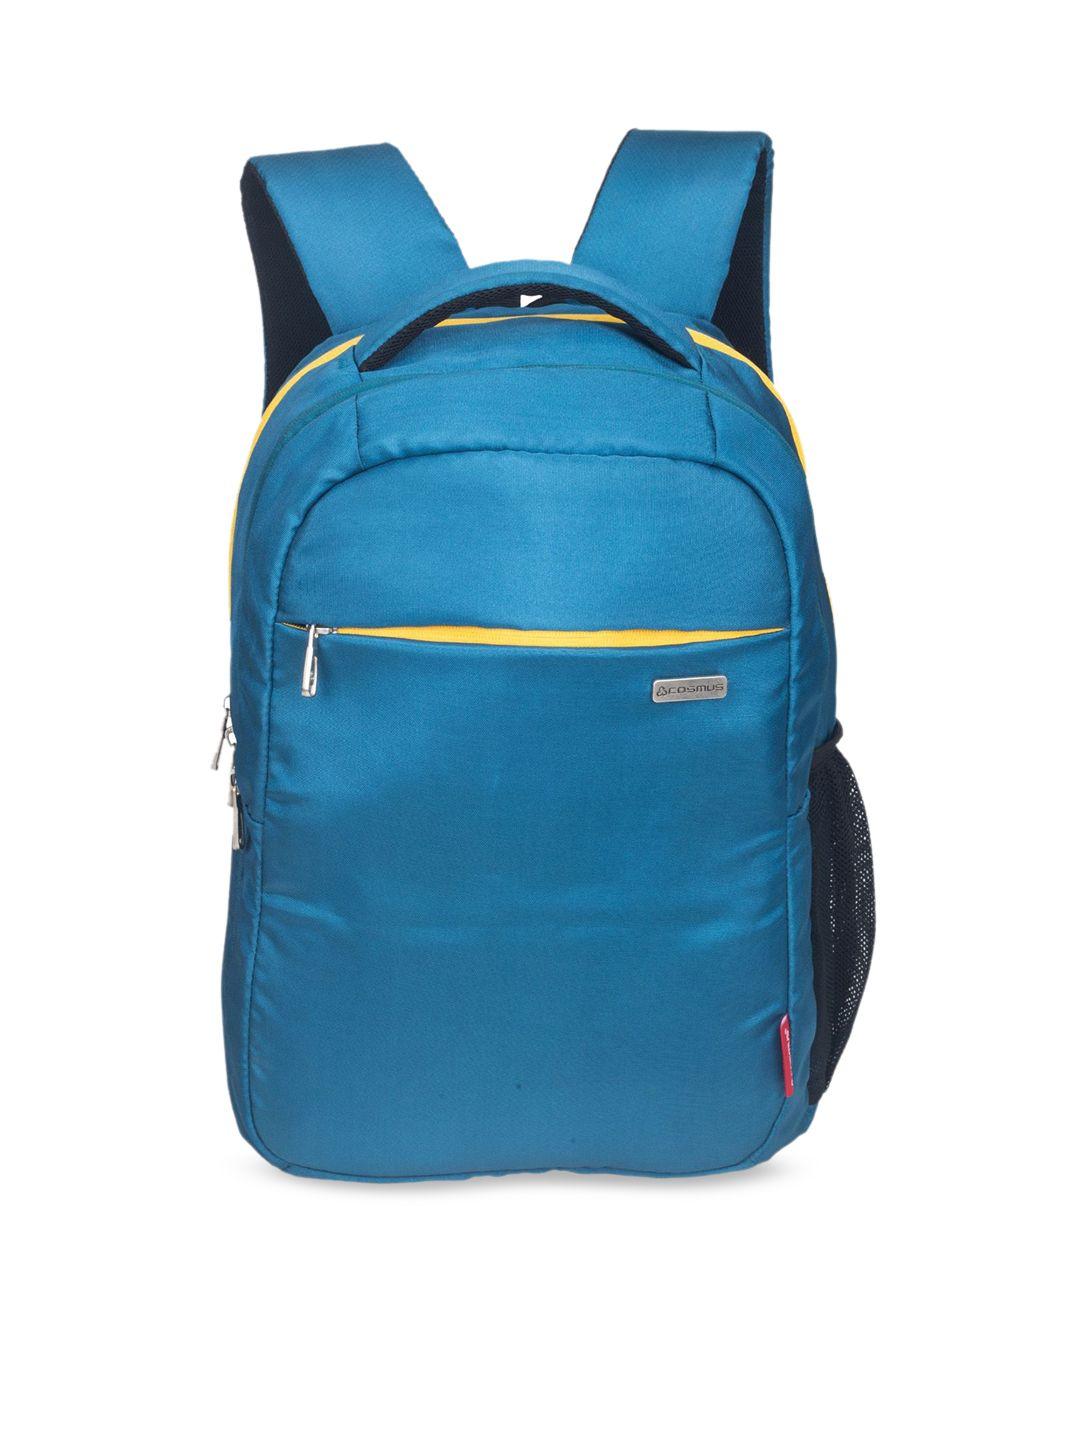 cosmus unisex blue solid laptop backpack